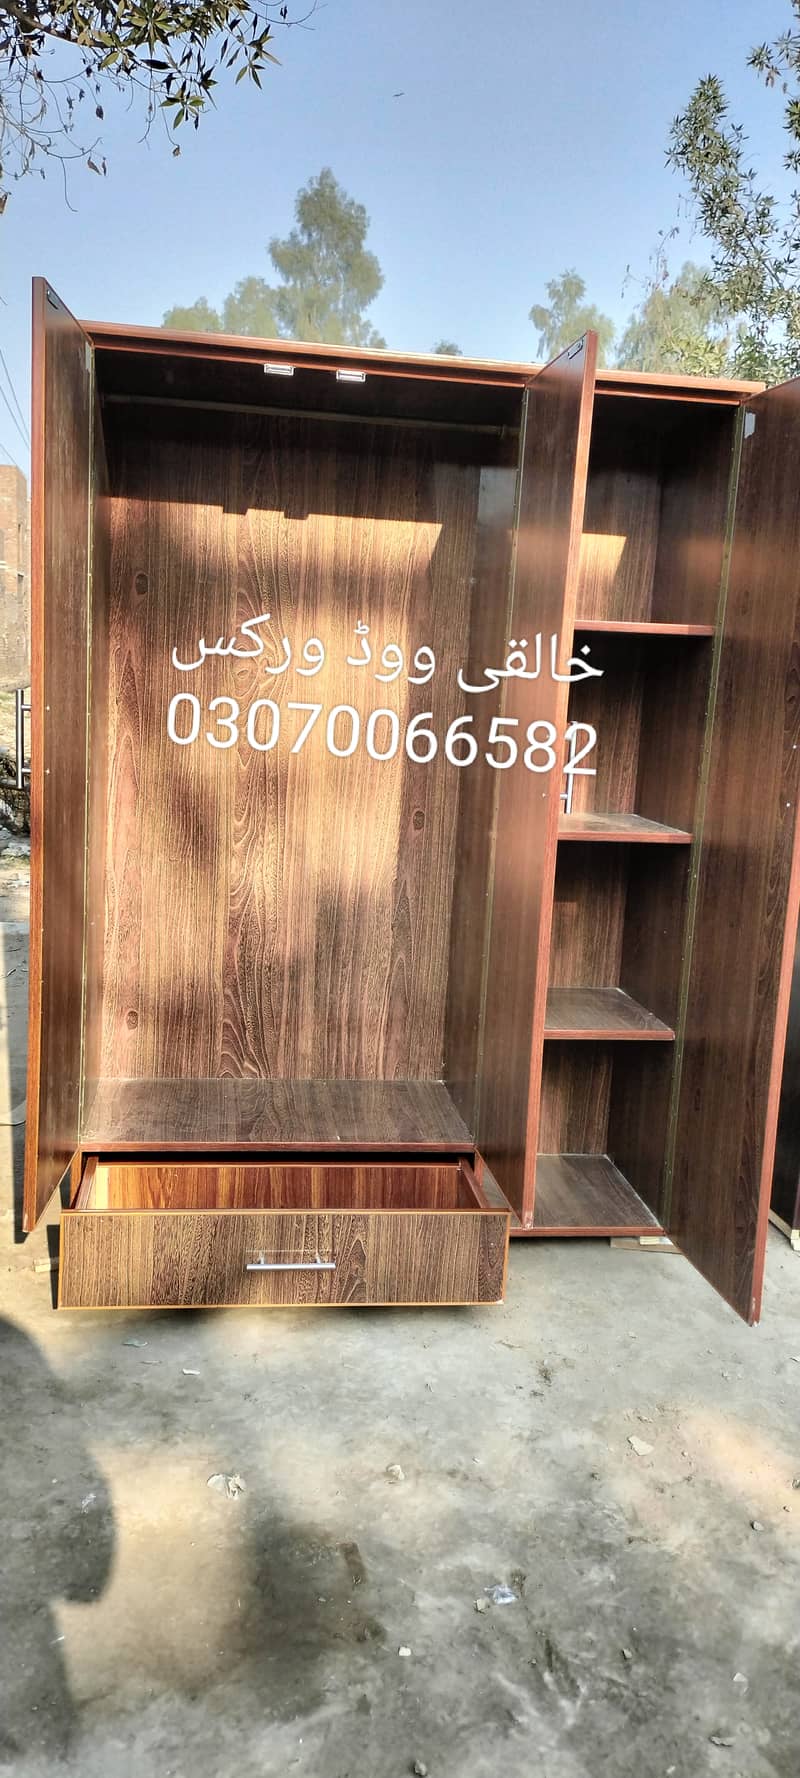 Wood wardrobes available or wood work 3